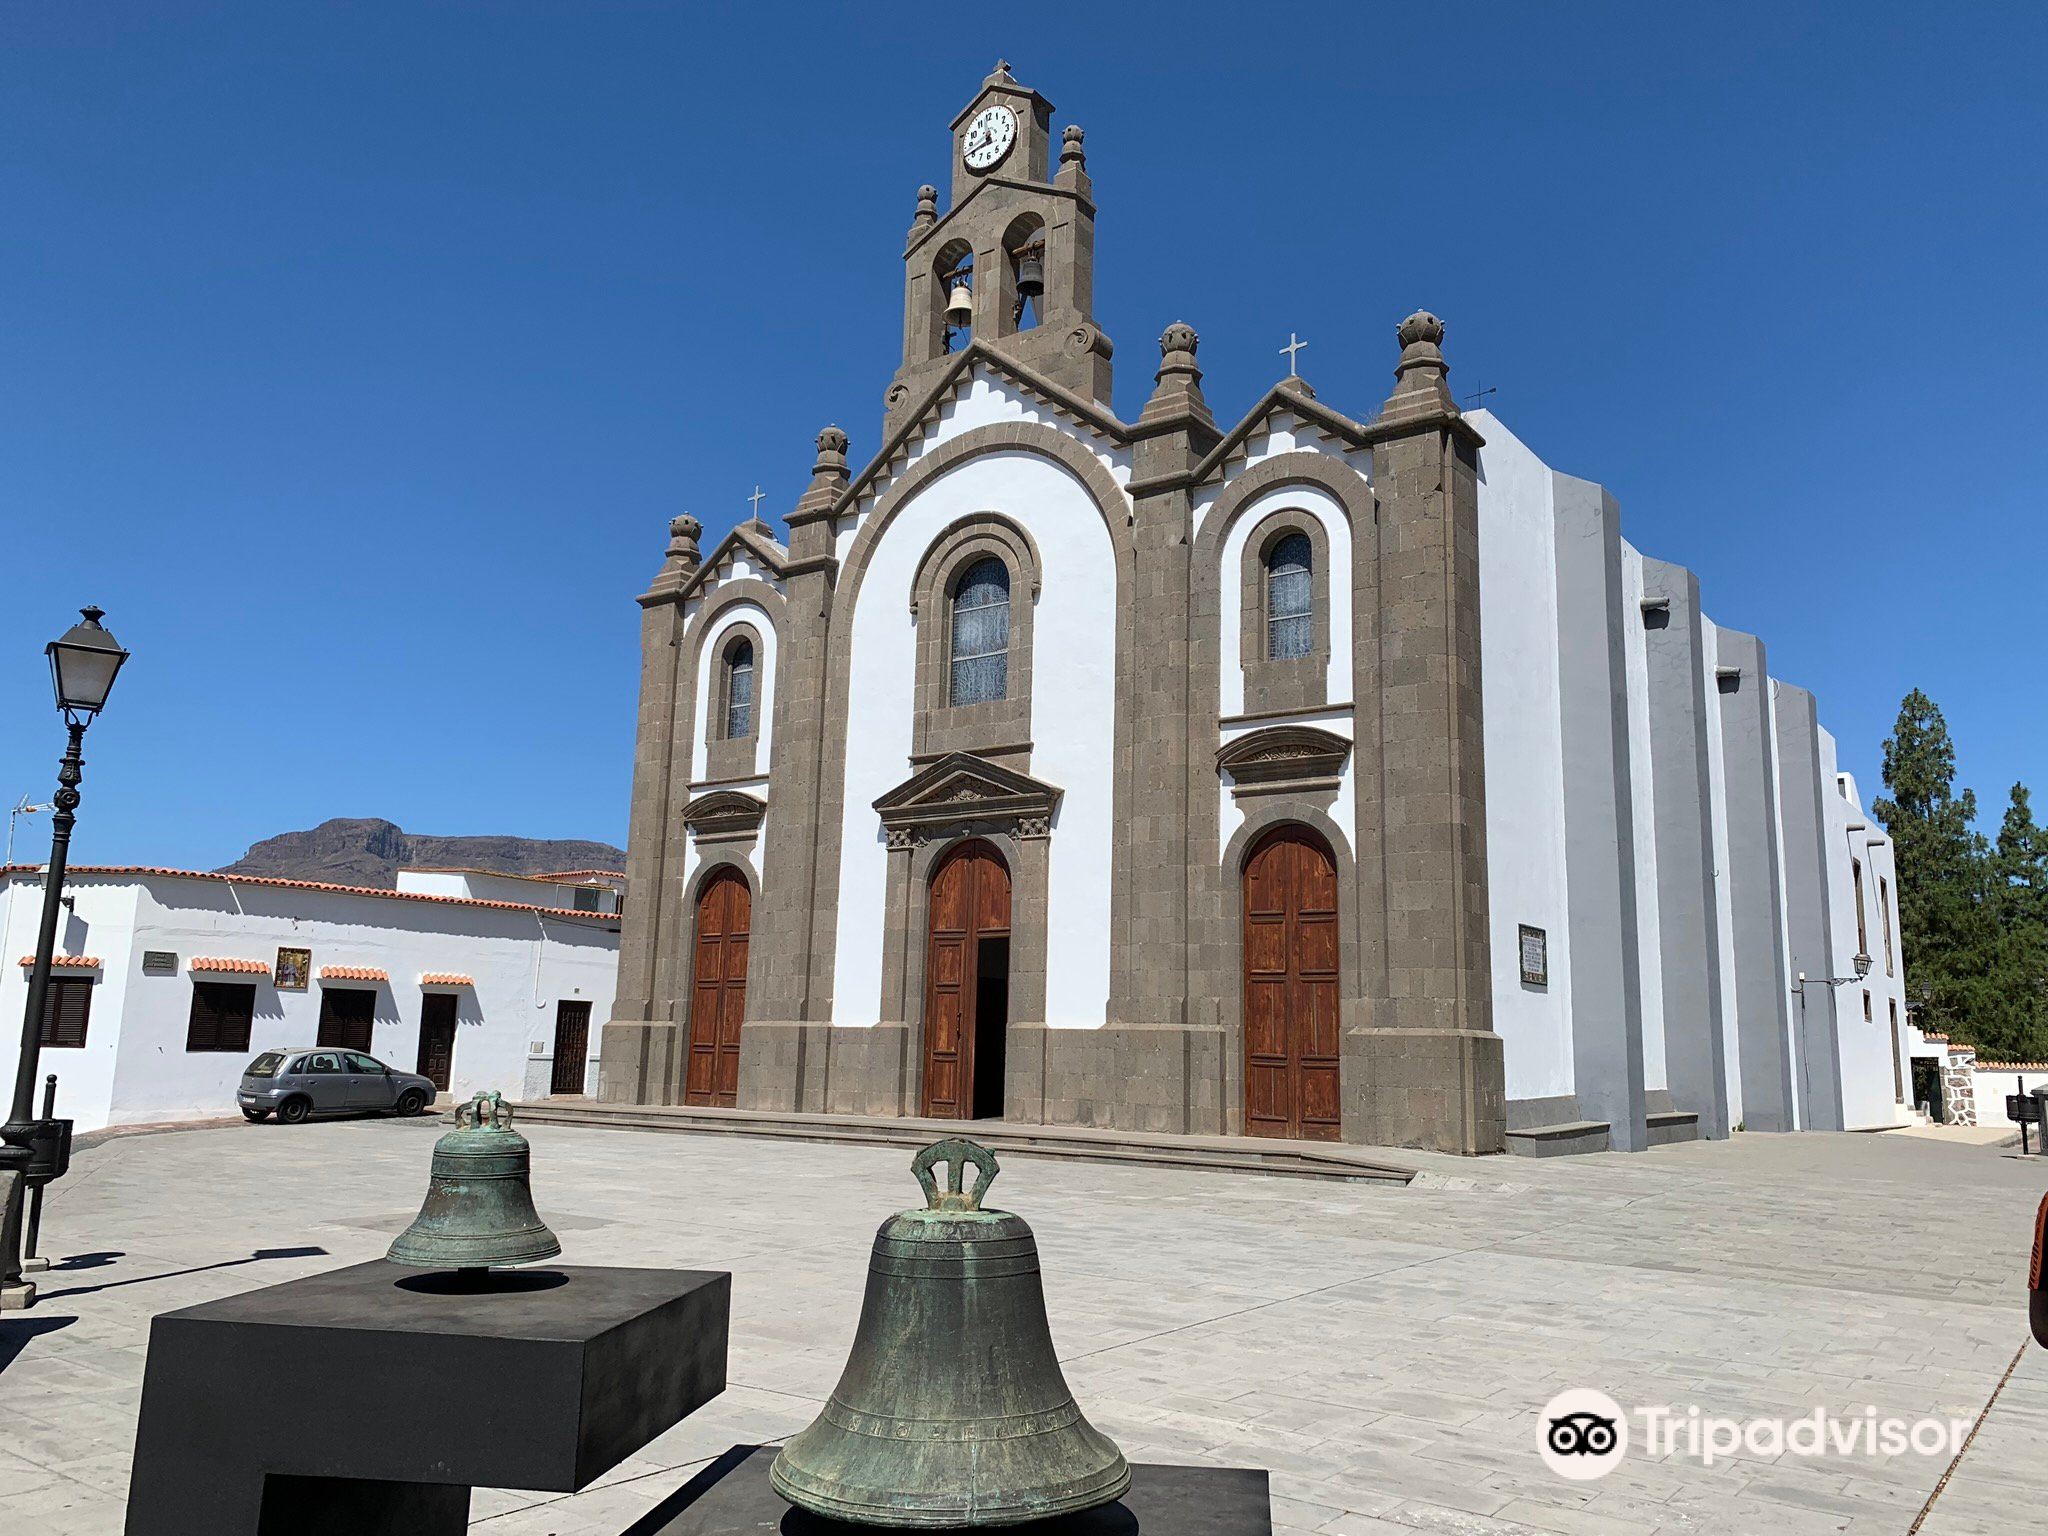 Iglesia de Santa Lucia attraction reviews - Iglesia de Santa Lucia tickets  - Iglesia de Santa Lucia discounts - Iglesia de Santa Lucia transportation,  address, opening hours - attractions, hotels, and food